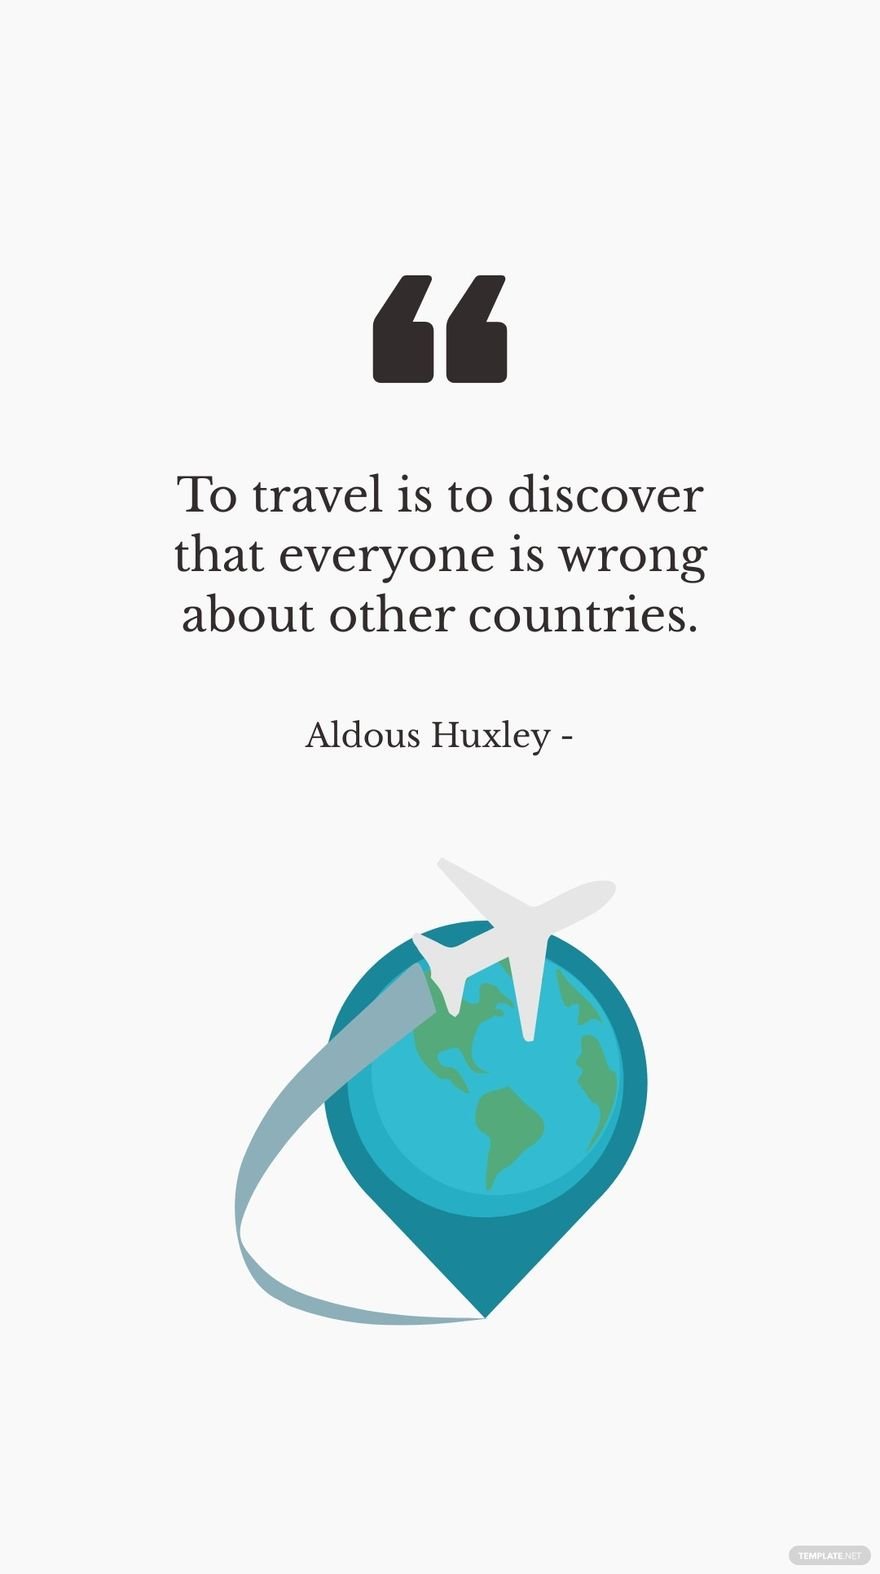 Free Aldous Huxley - To travel is to discover that everyone is wrong about other countries. in JPG